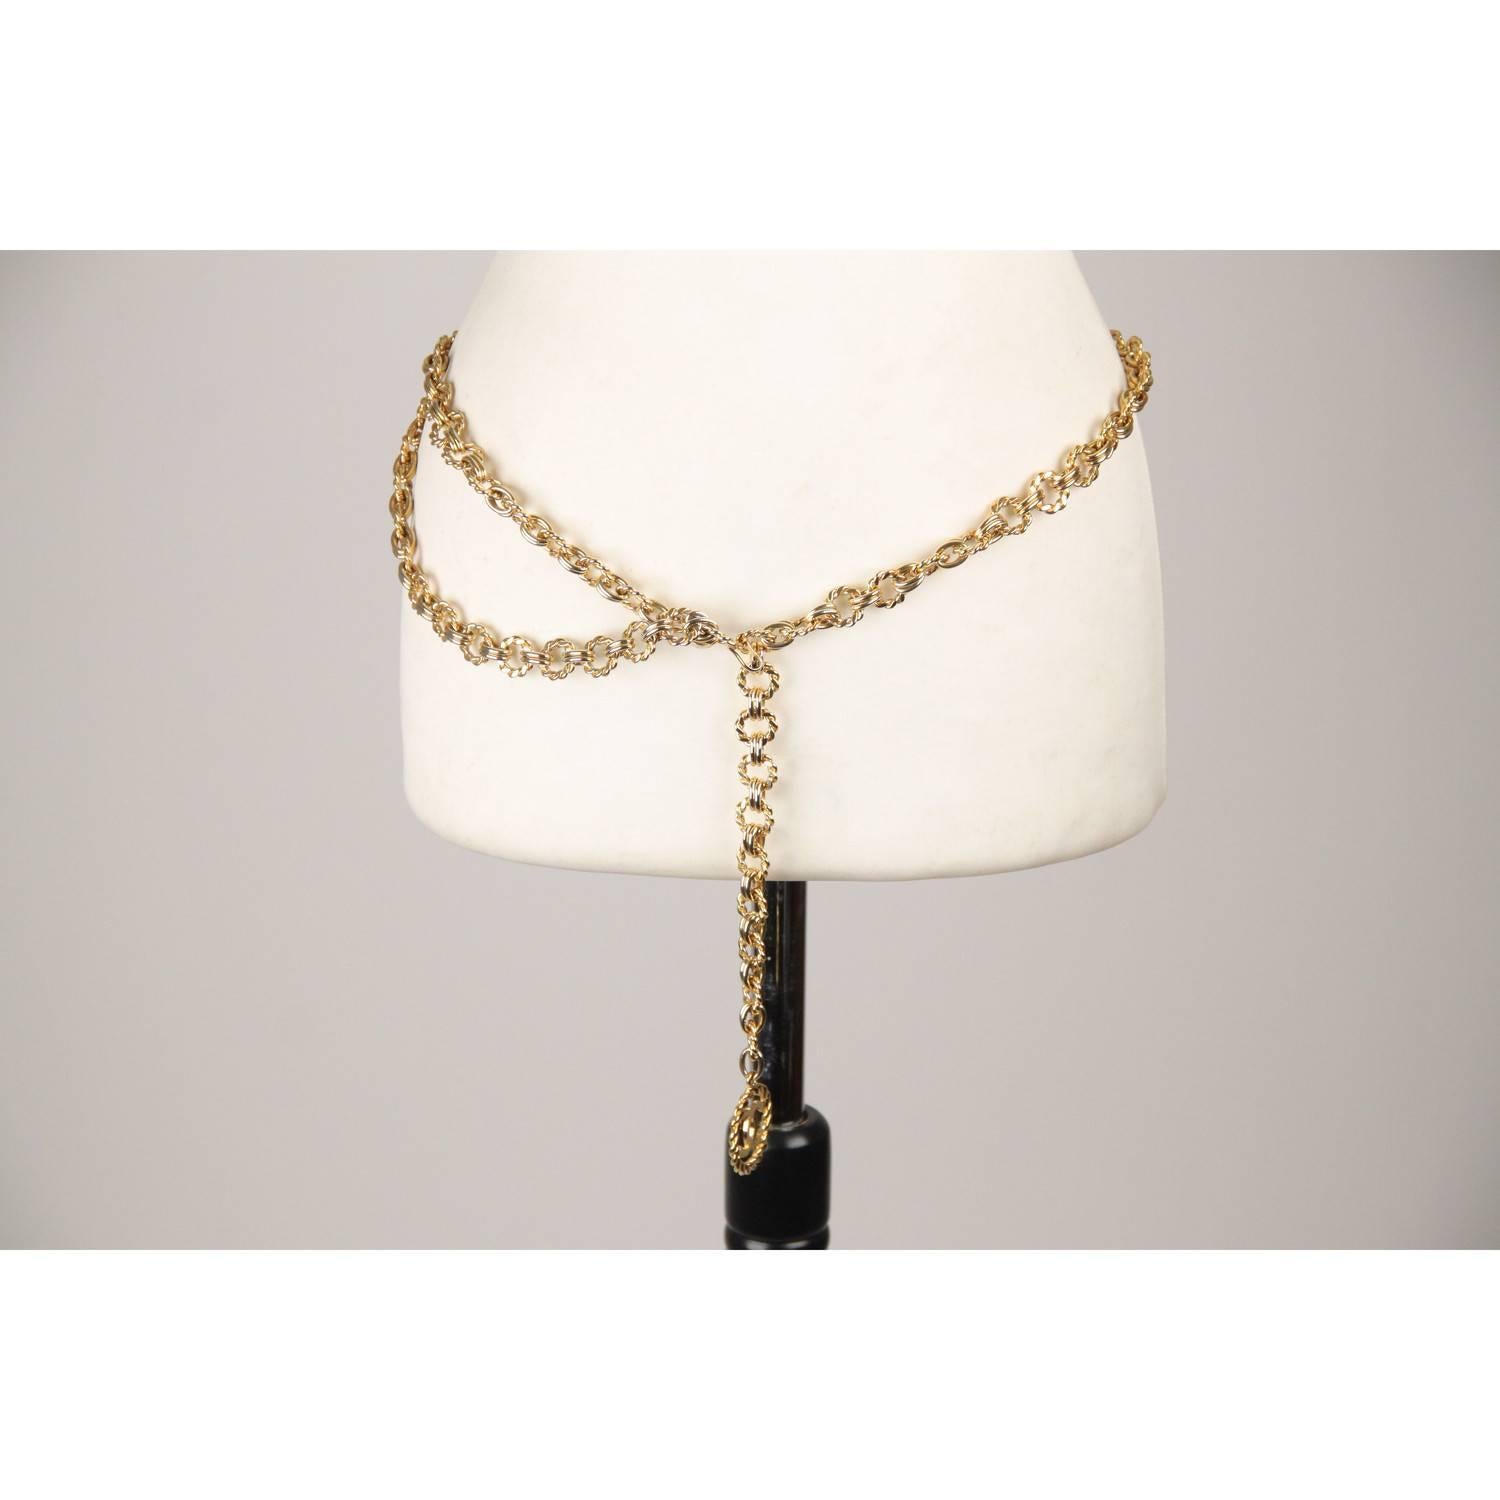 Women's CHANEL Vintage Gold Metal RING Chain Necklace or Belt CC Pendant